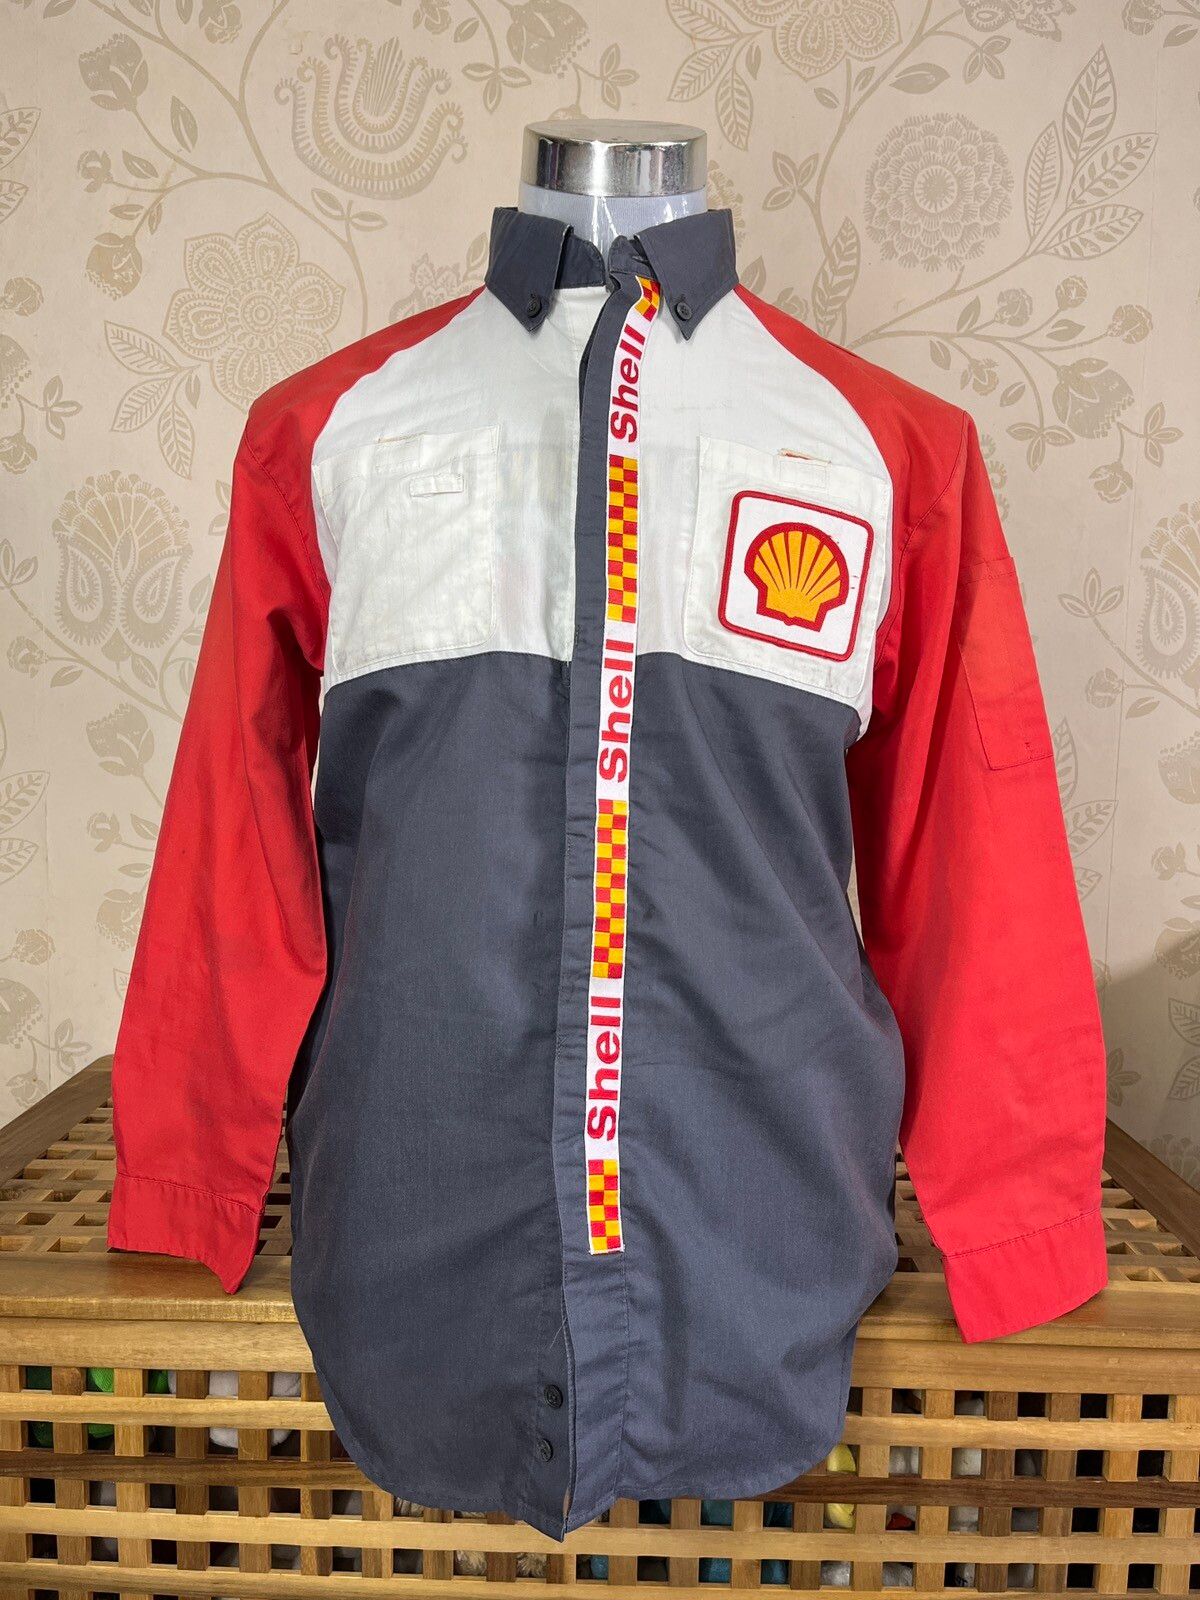 Shell Uniform Workers Vintage Japanese Outlet 1990s - 1